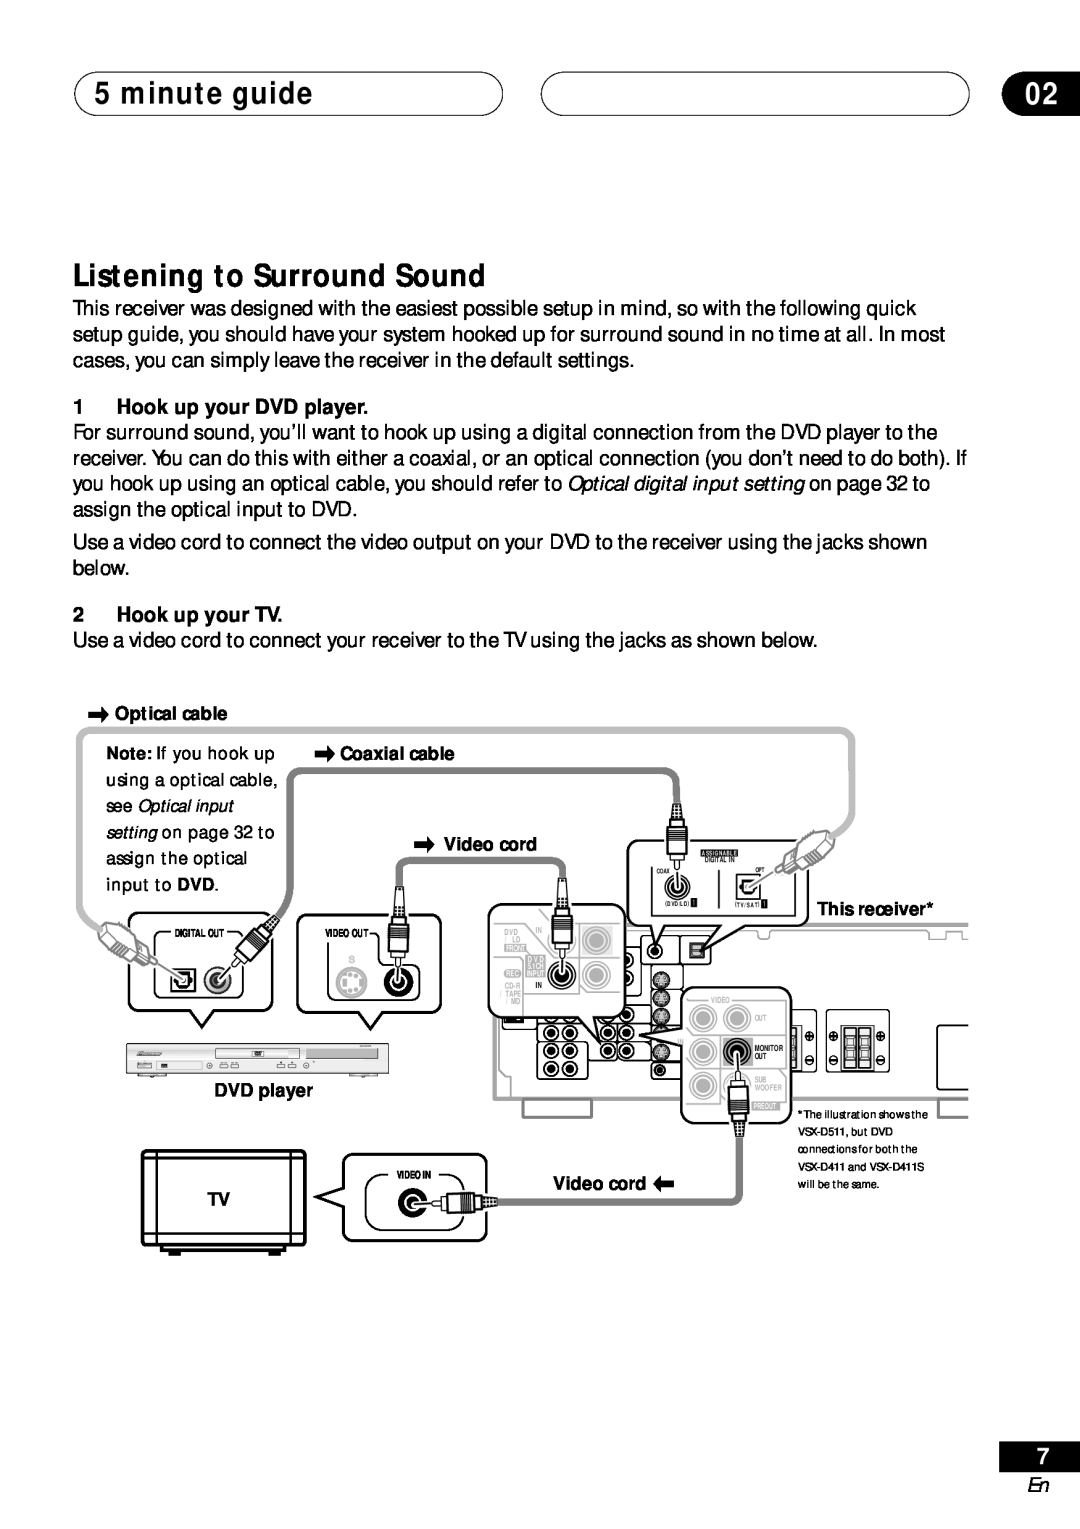 Pioneer VSX-D411 operating instructions minute guide, Listening to Surround Sound, Hook up your DVD player, Hook up your TV 